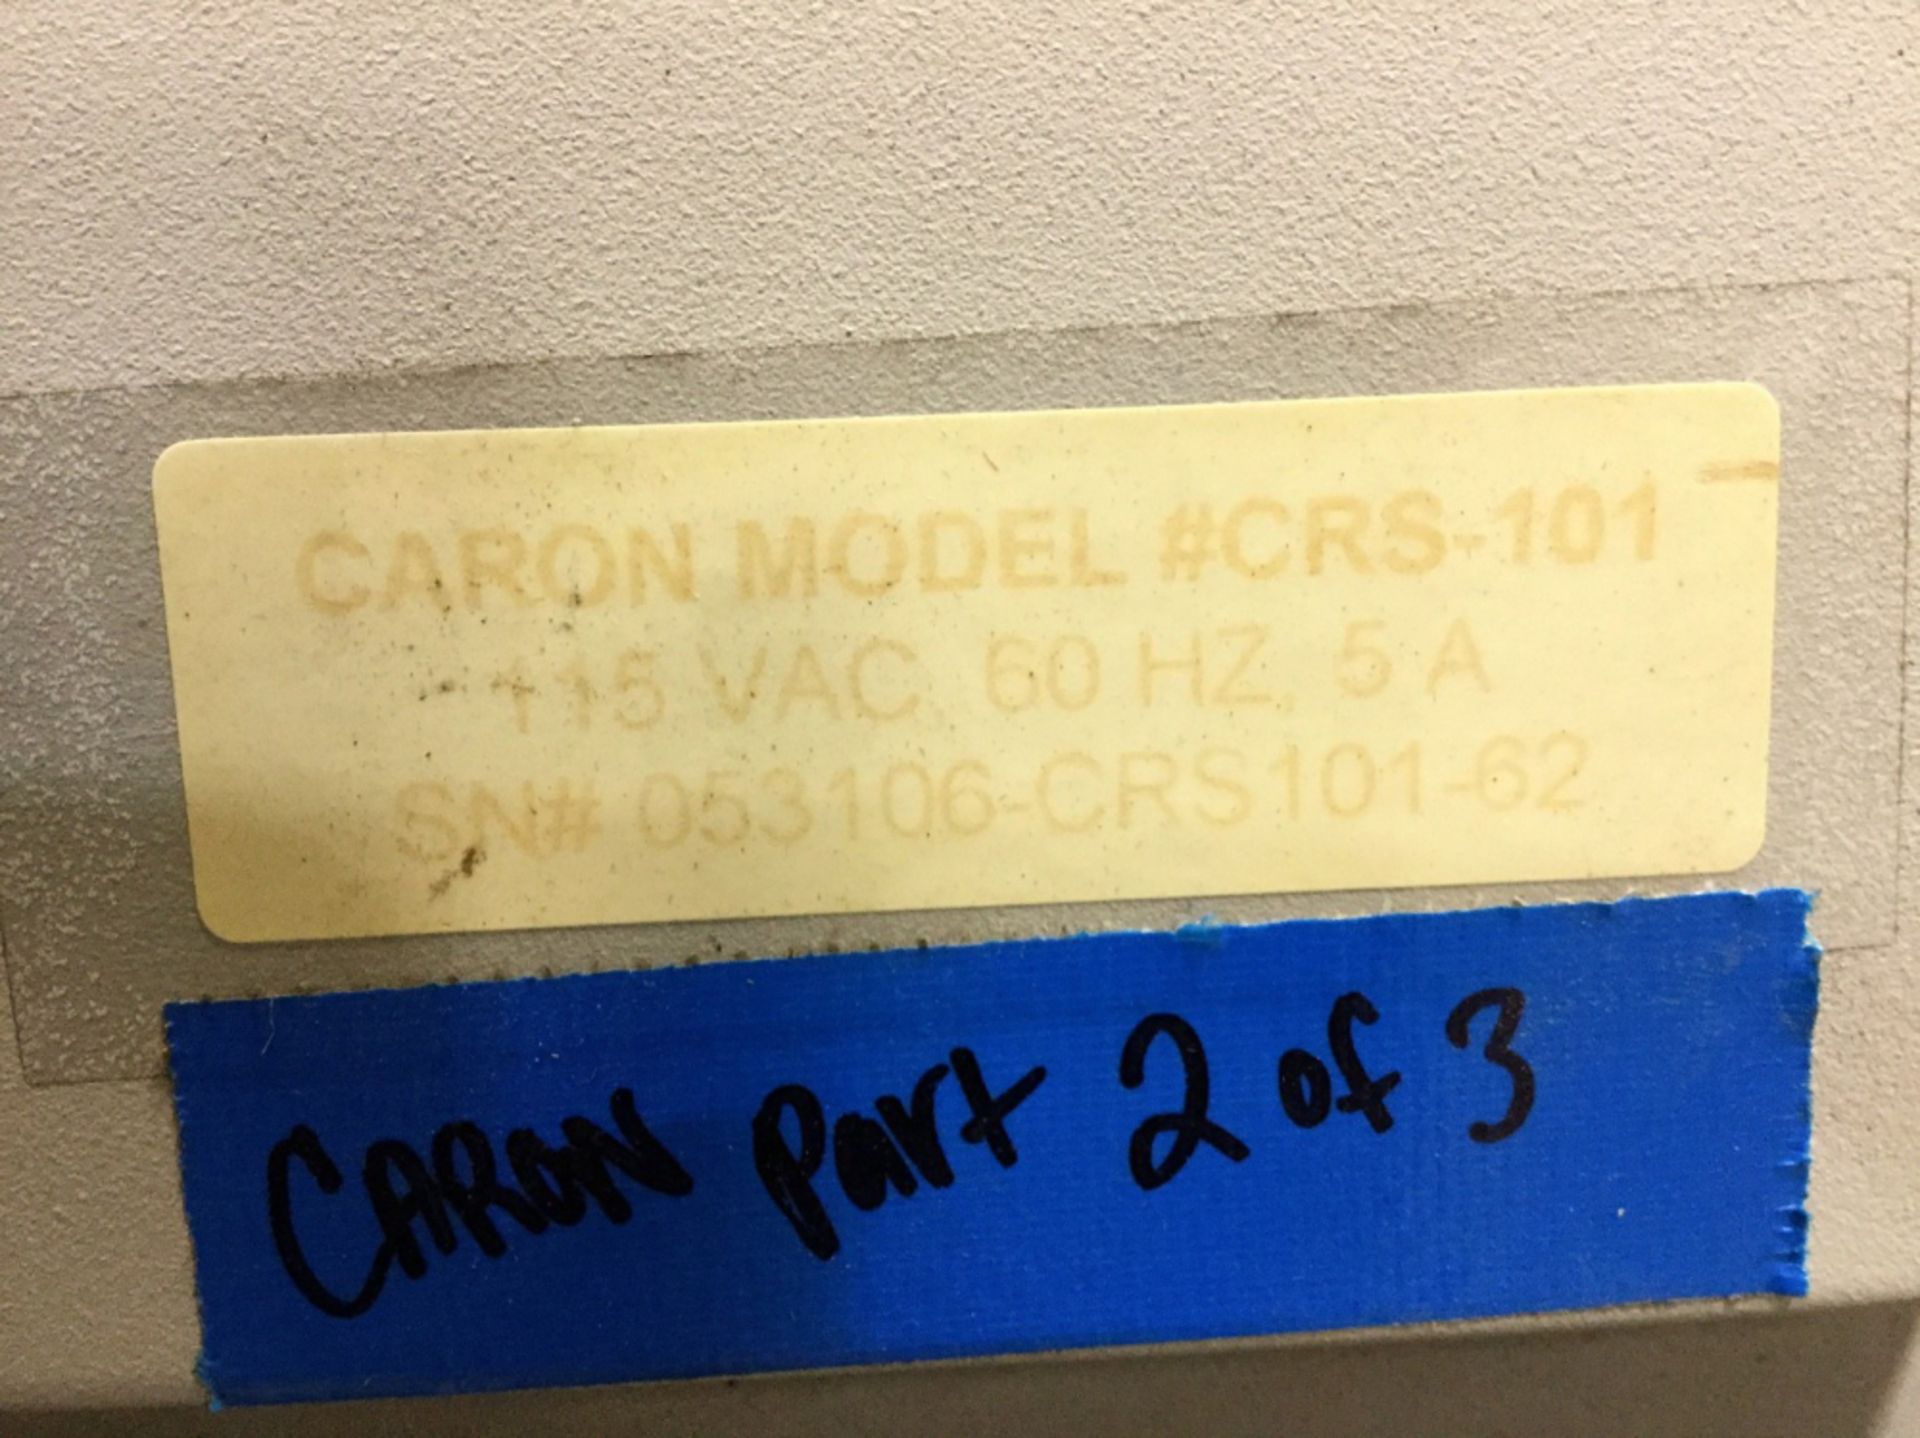 Caron 6515 Photostability Chamber and CRS-101 Condensate Recirculator - Image 3 of 5